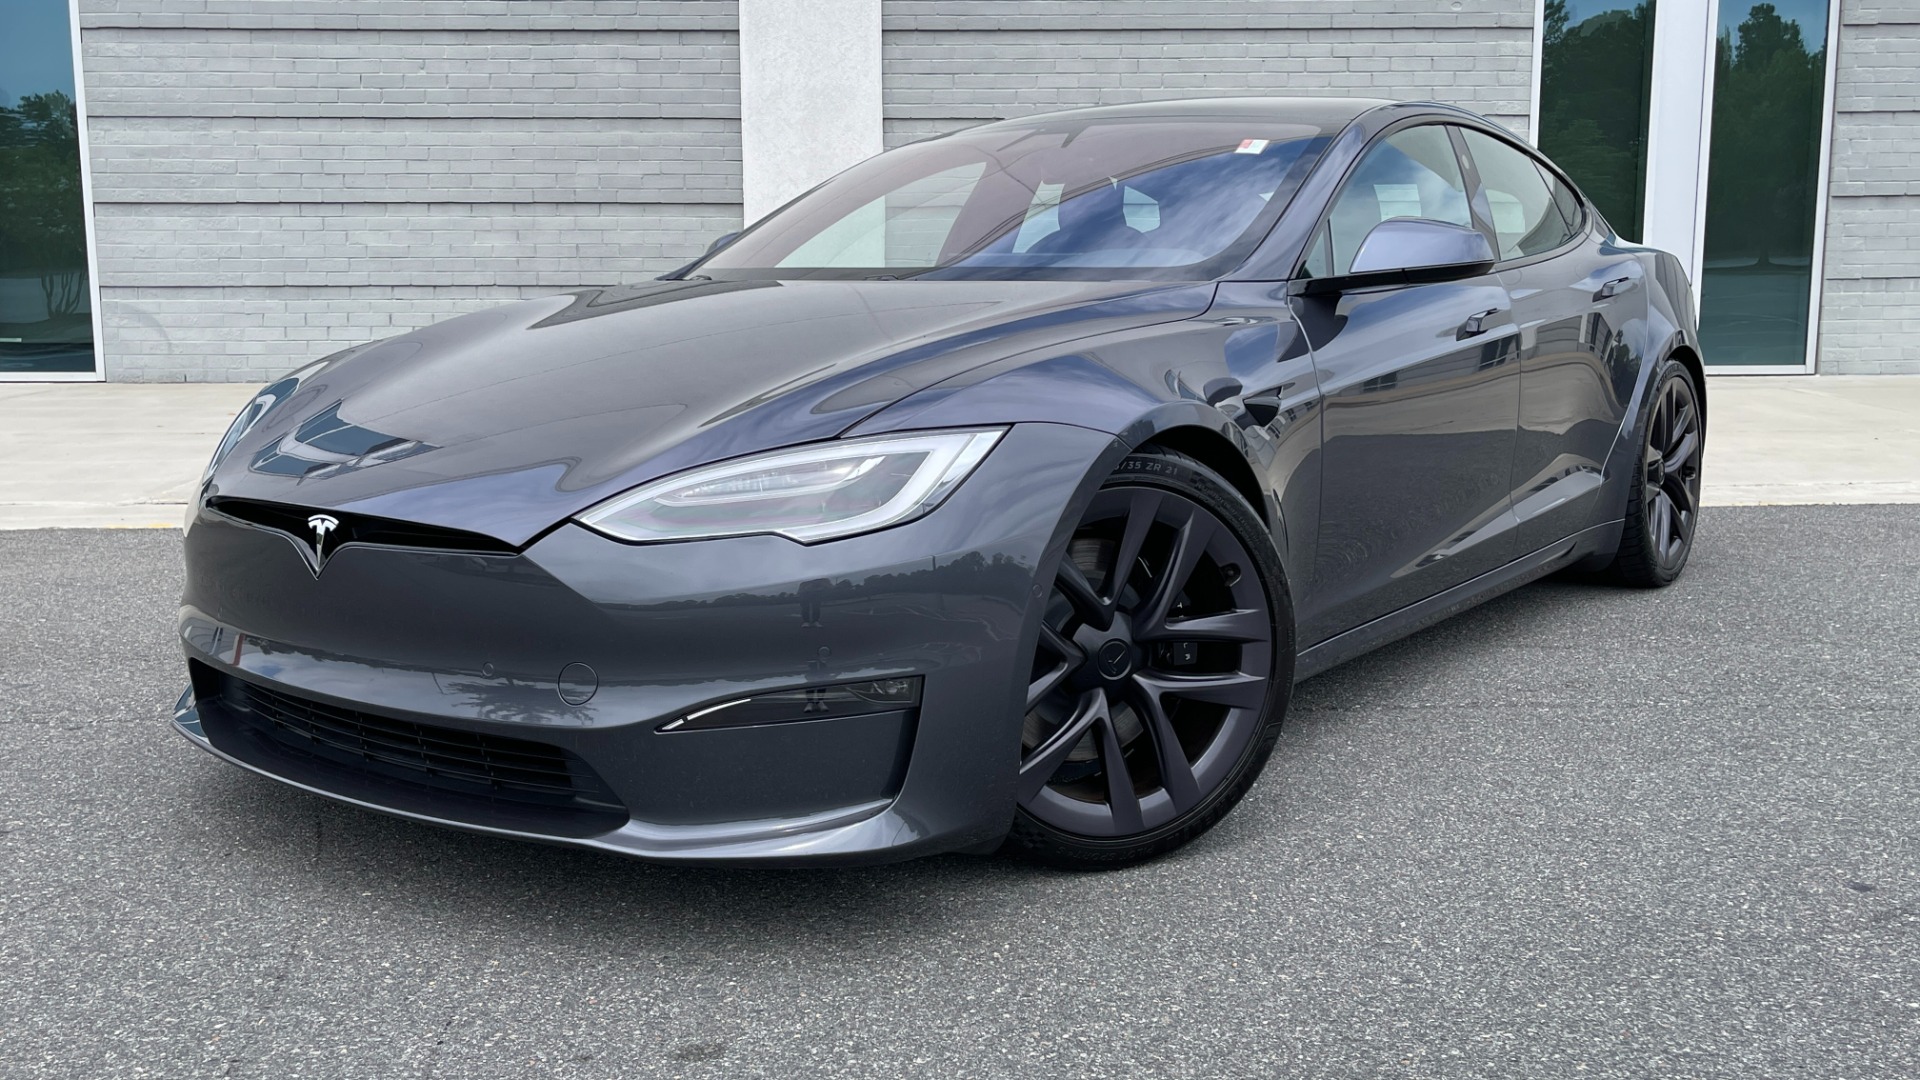 Used 2021 Tesla Model S Plaid / FULL SELF DRIVING / 21IN WHEELS / CARBON FIBER TRIM / PREMIUM CONNE for sale $134,000 at Formula Imports in Charlotte NC 28227 48